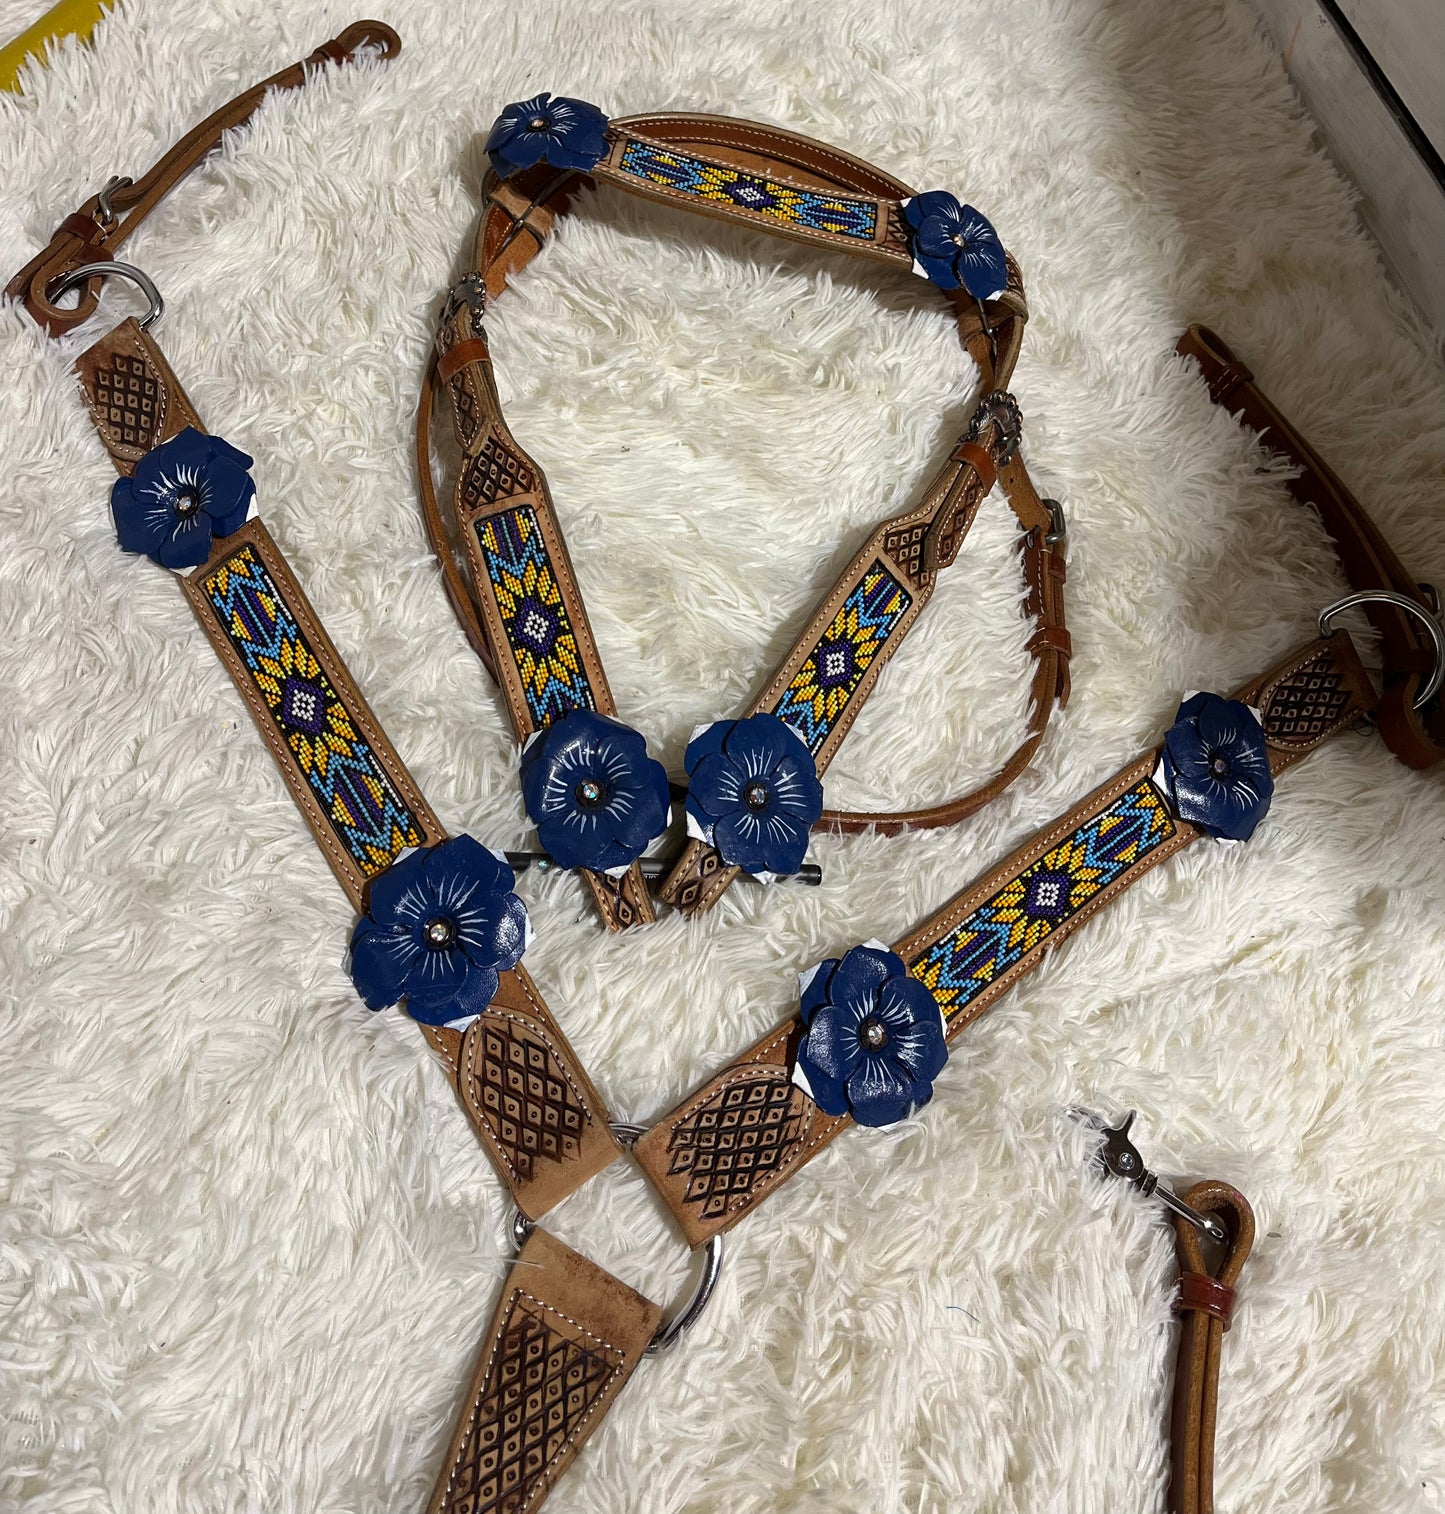 Beaded tack set (flowers on bit rings were taken off and swapped with conchos).